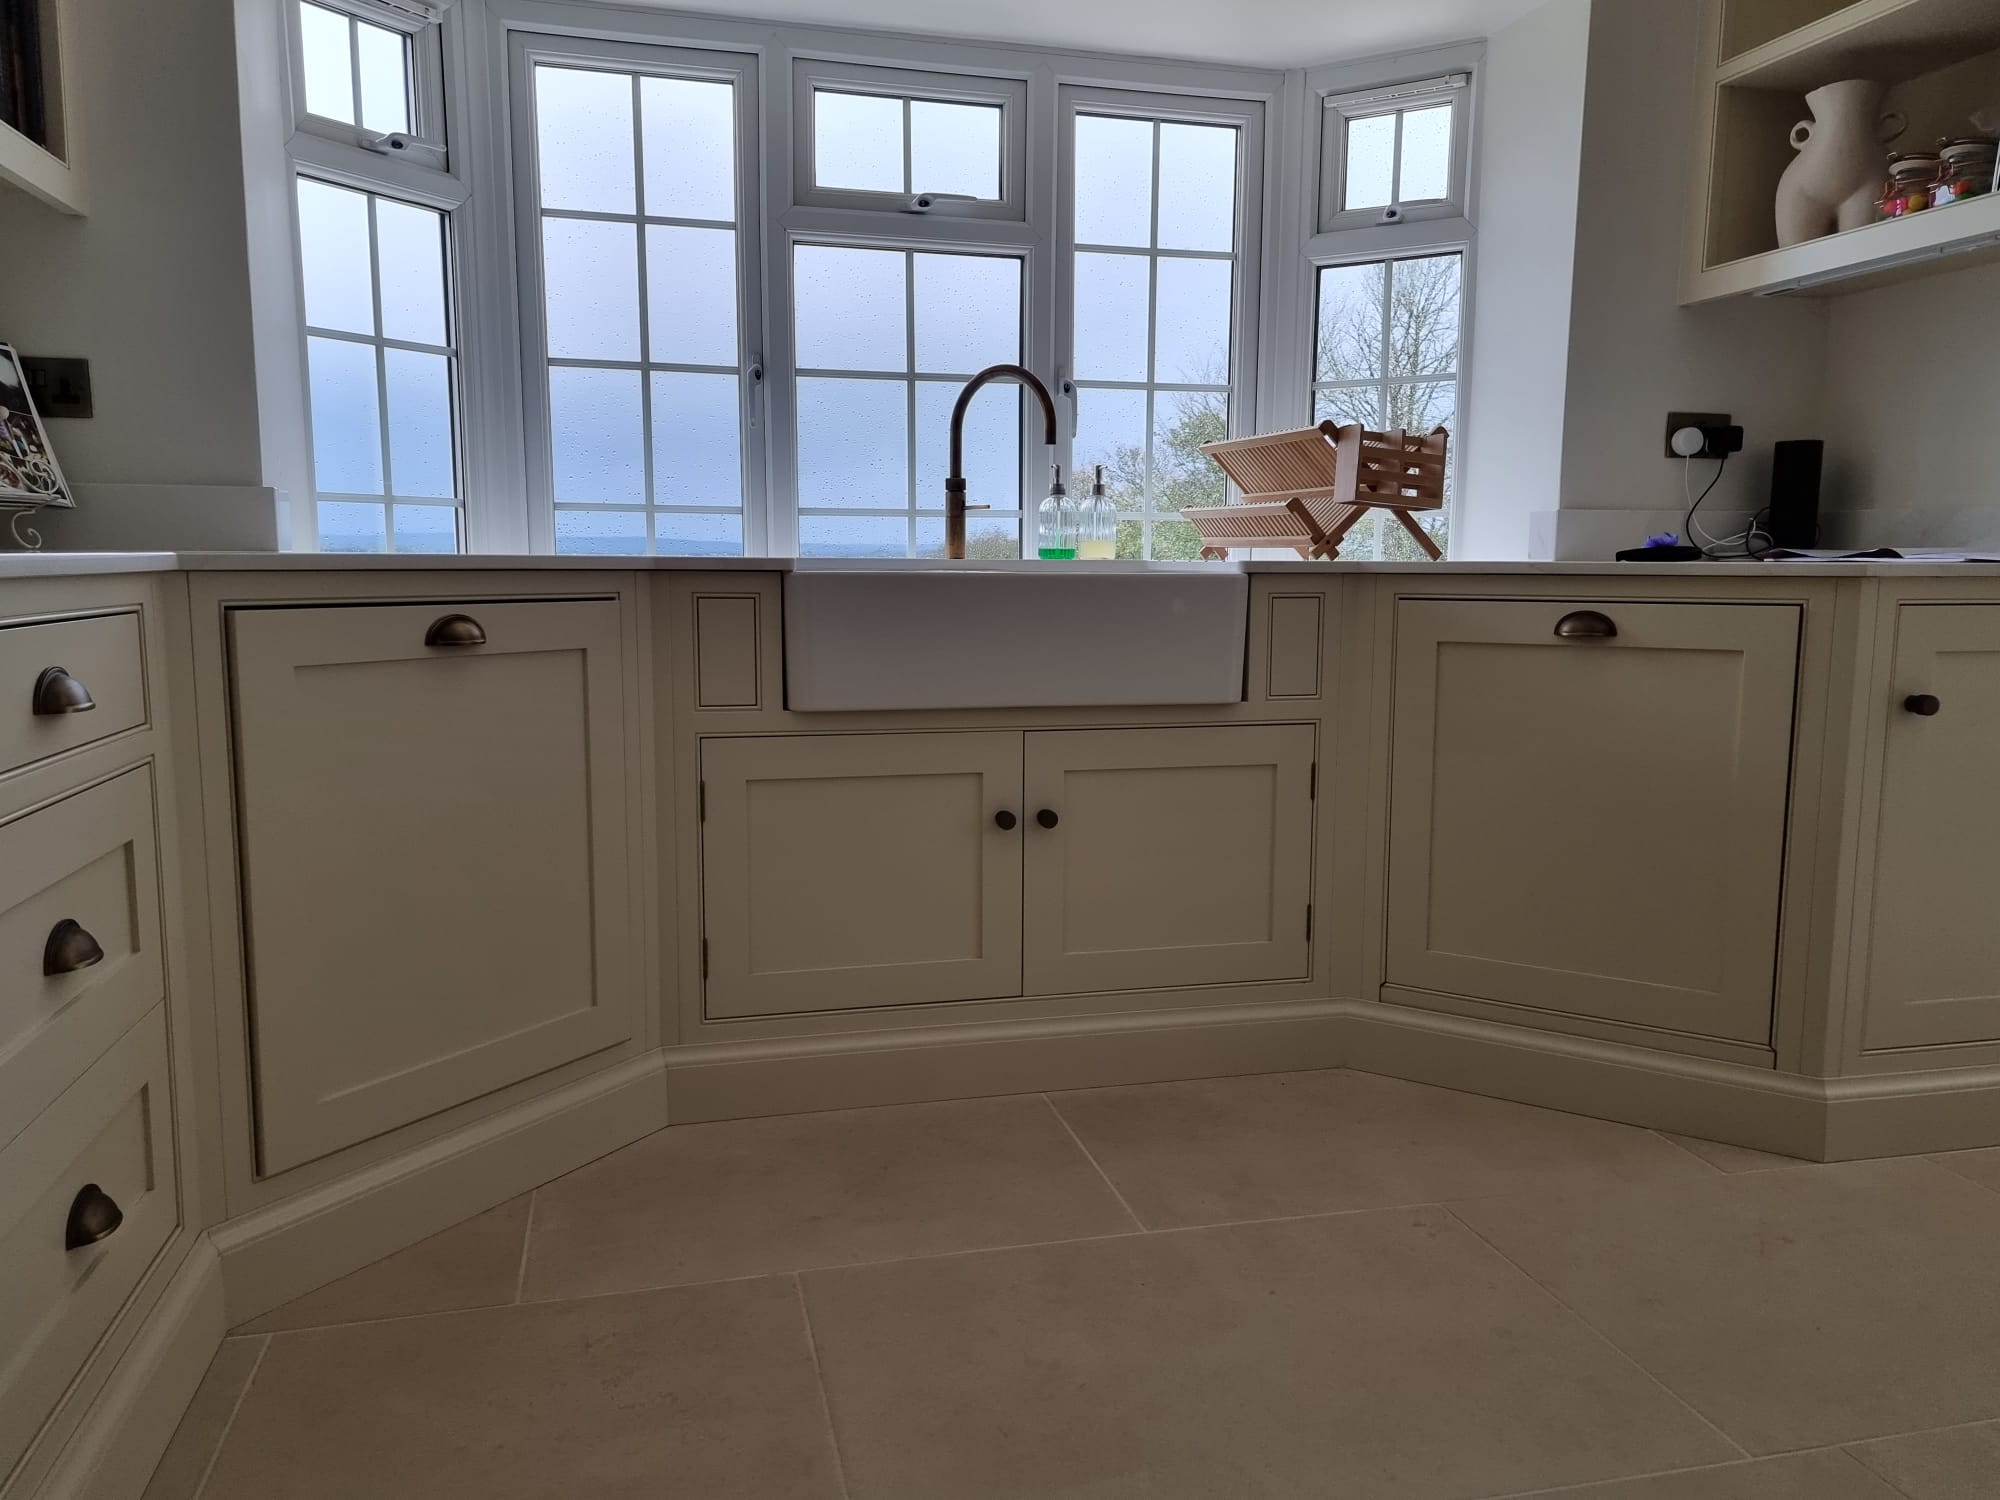 Bespoke kitchen cabinets by Kings Stag Joinery